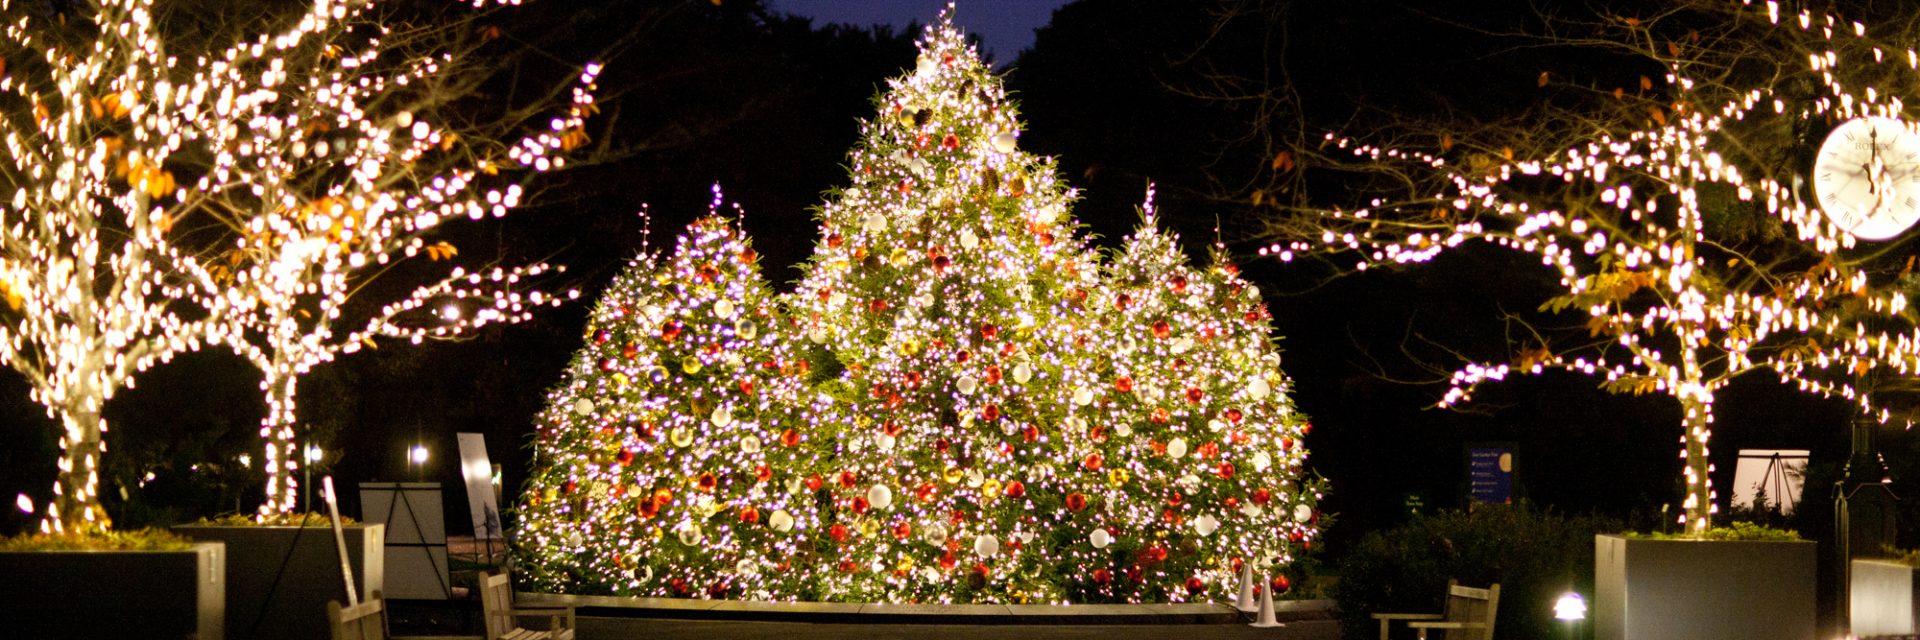 brooklyn botanical gardens holiday lights 6 best places to see christmas lights in atlanta